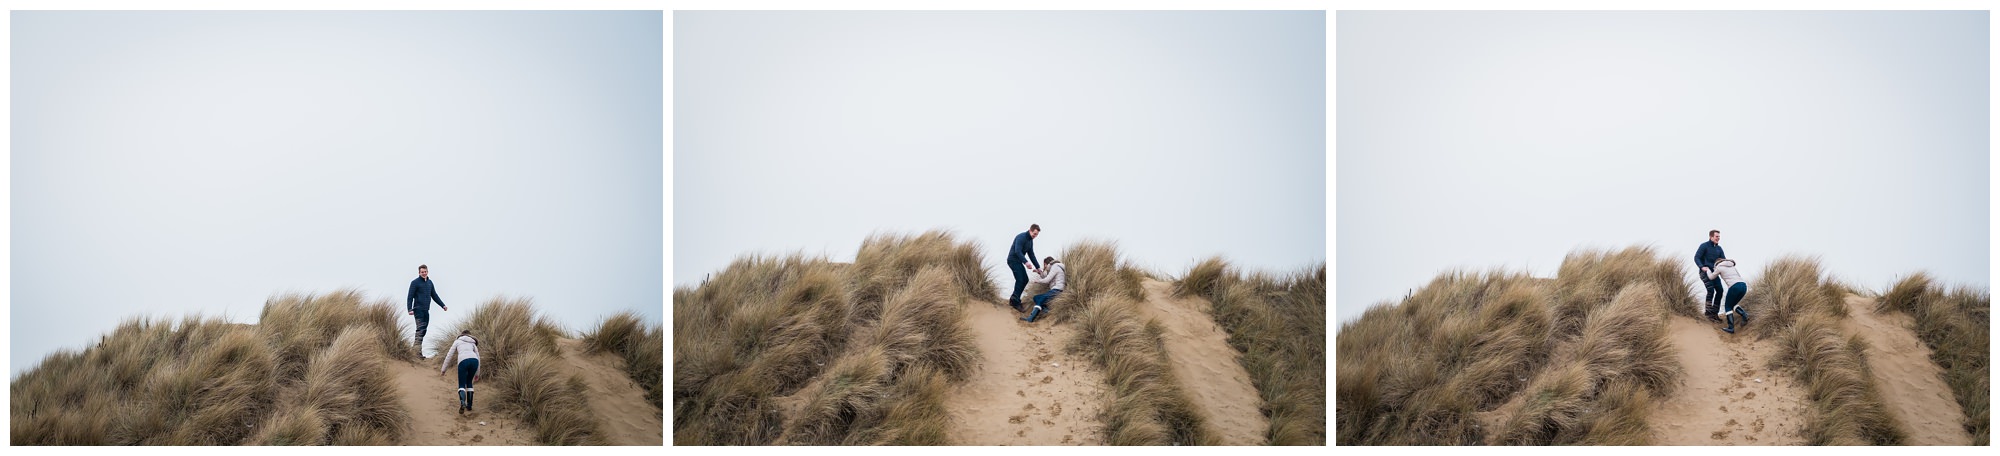 bride and groom to be climbing sand dunes